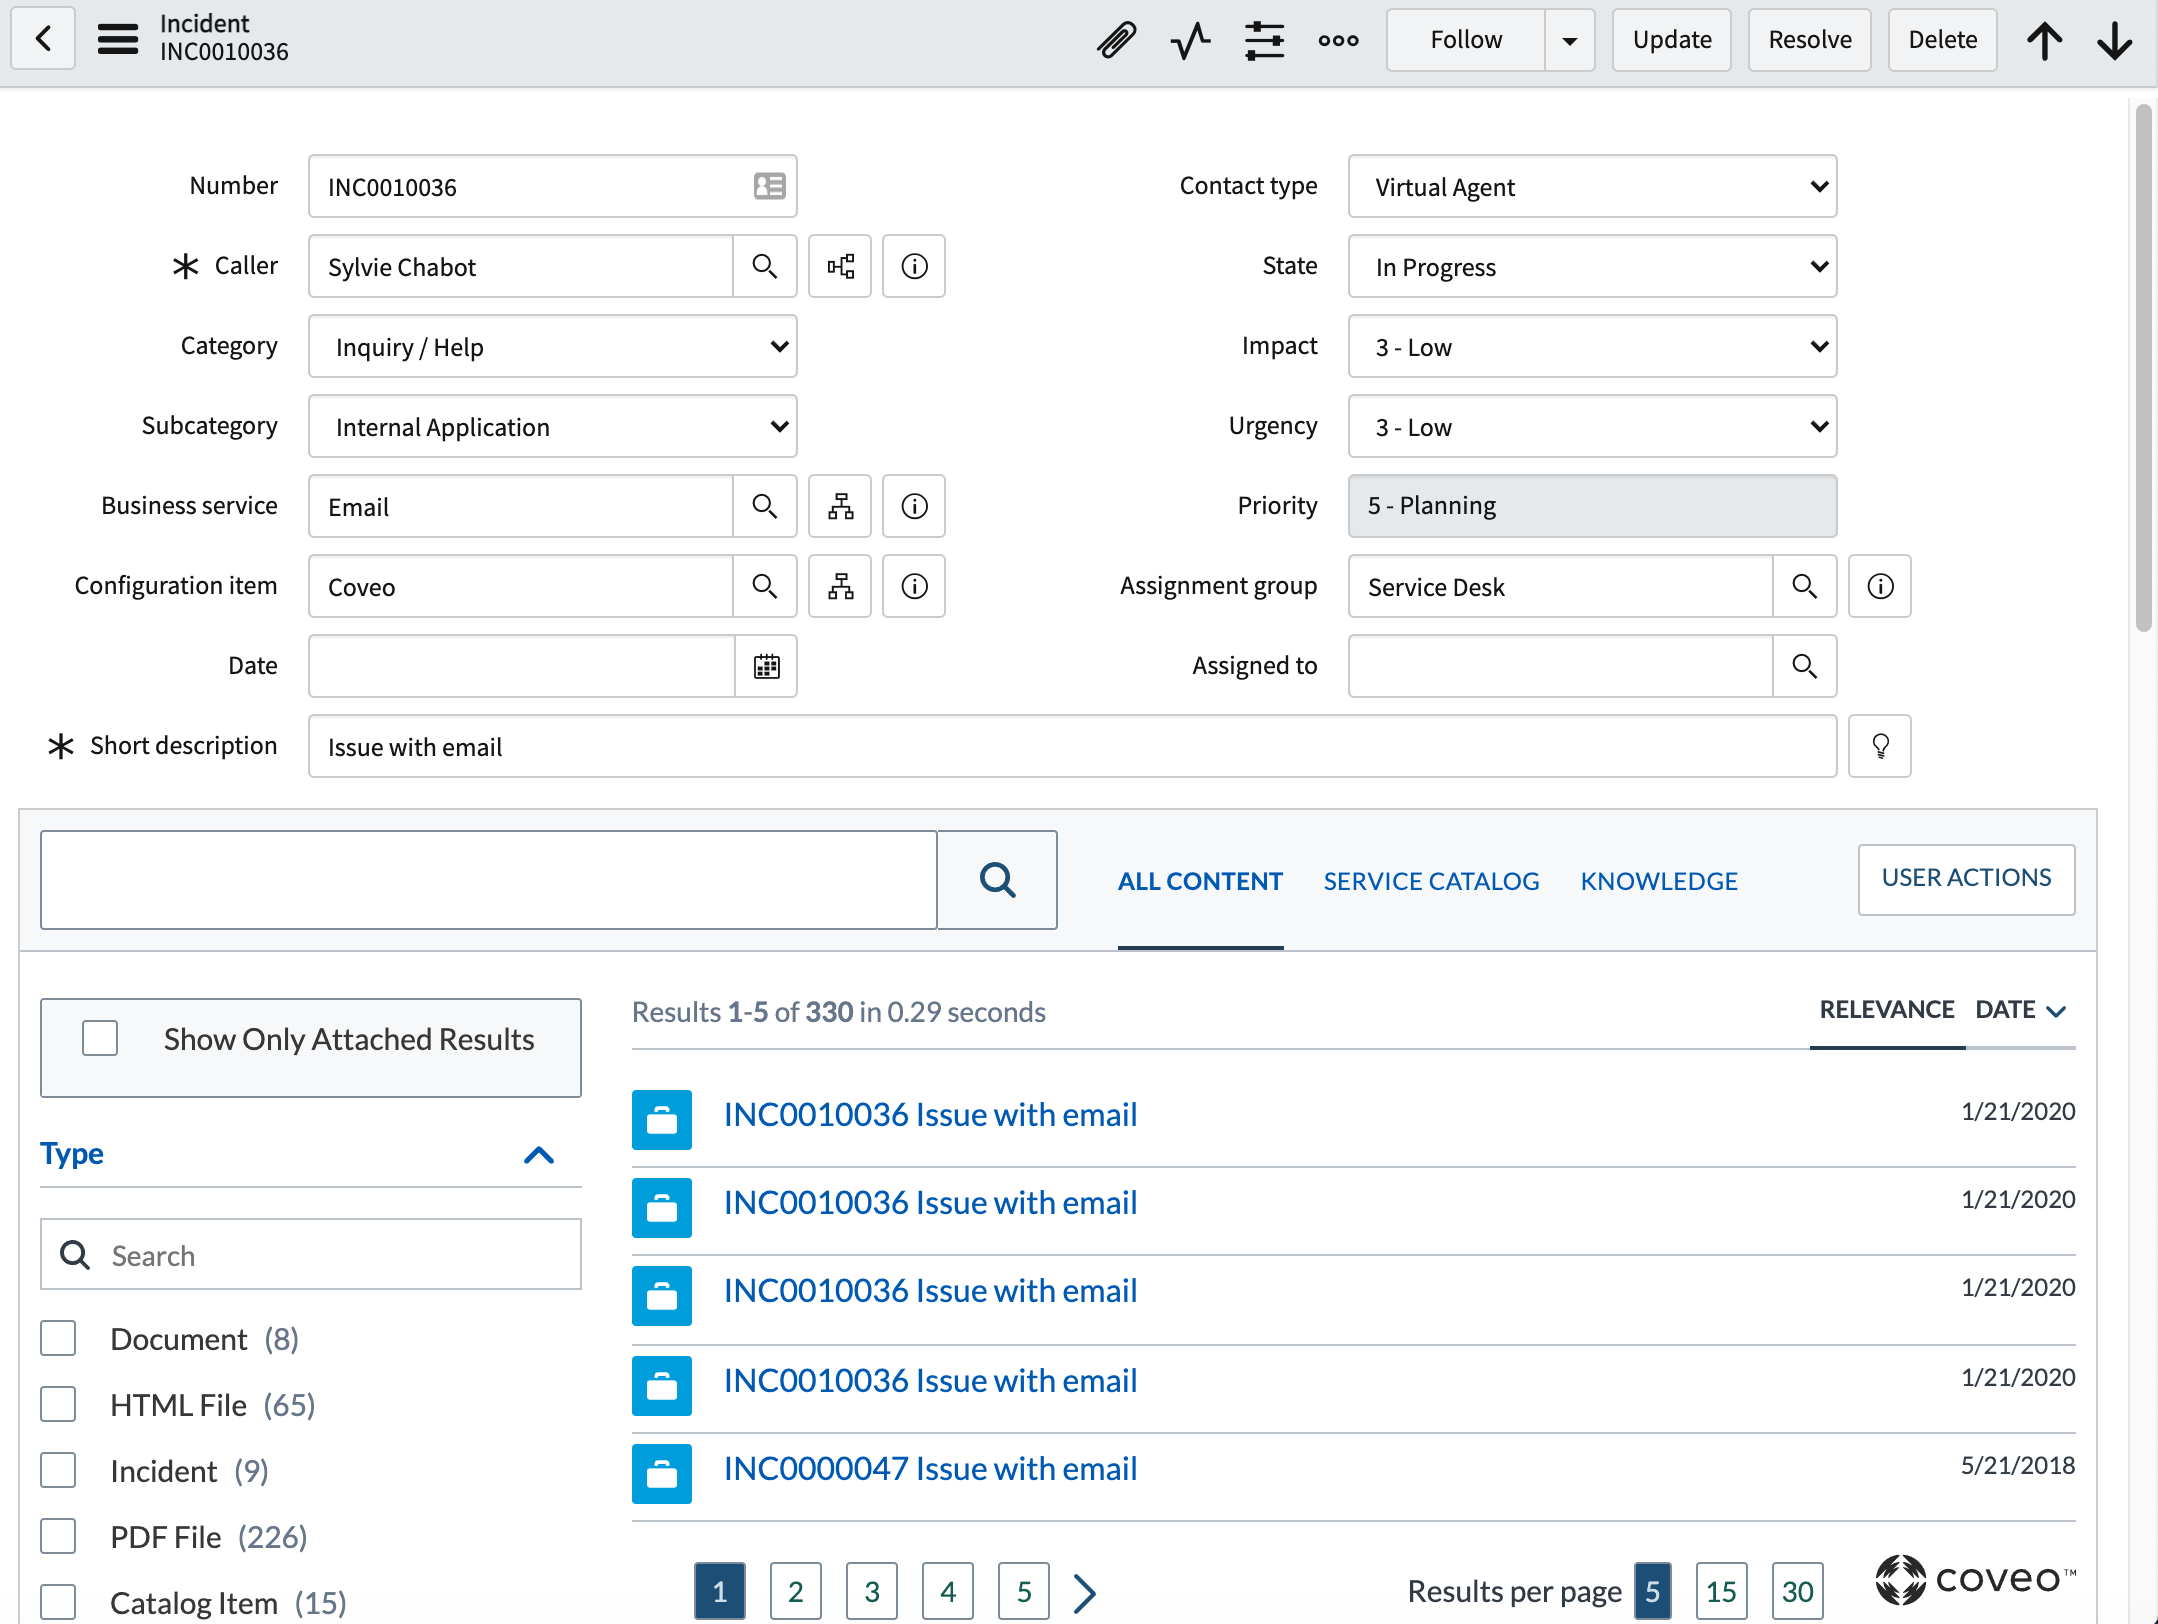 Insight panel embedded in the ServiceNow interface